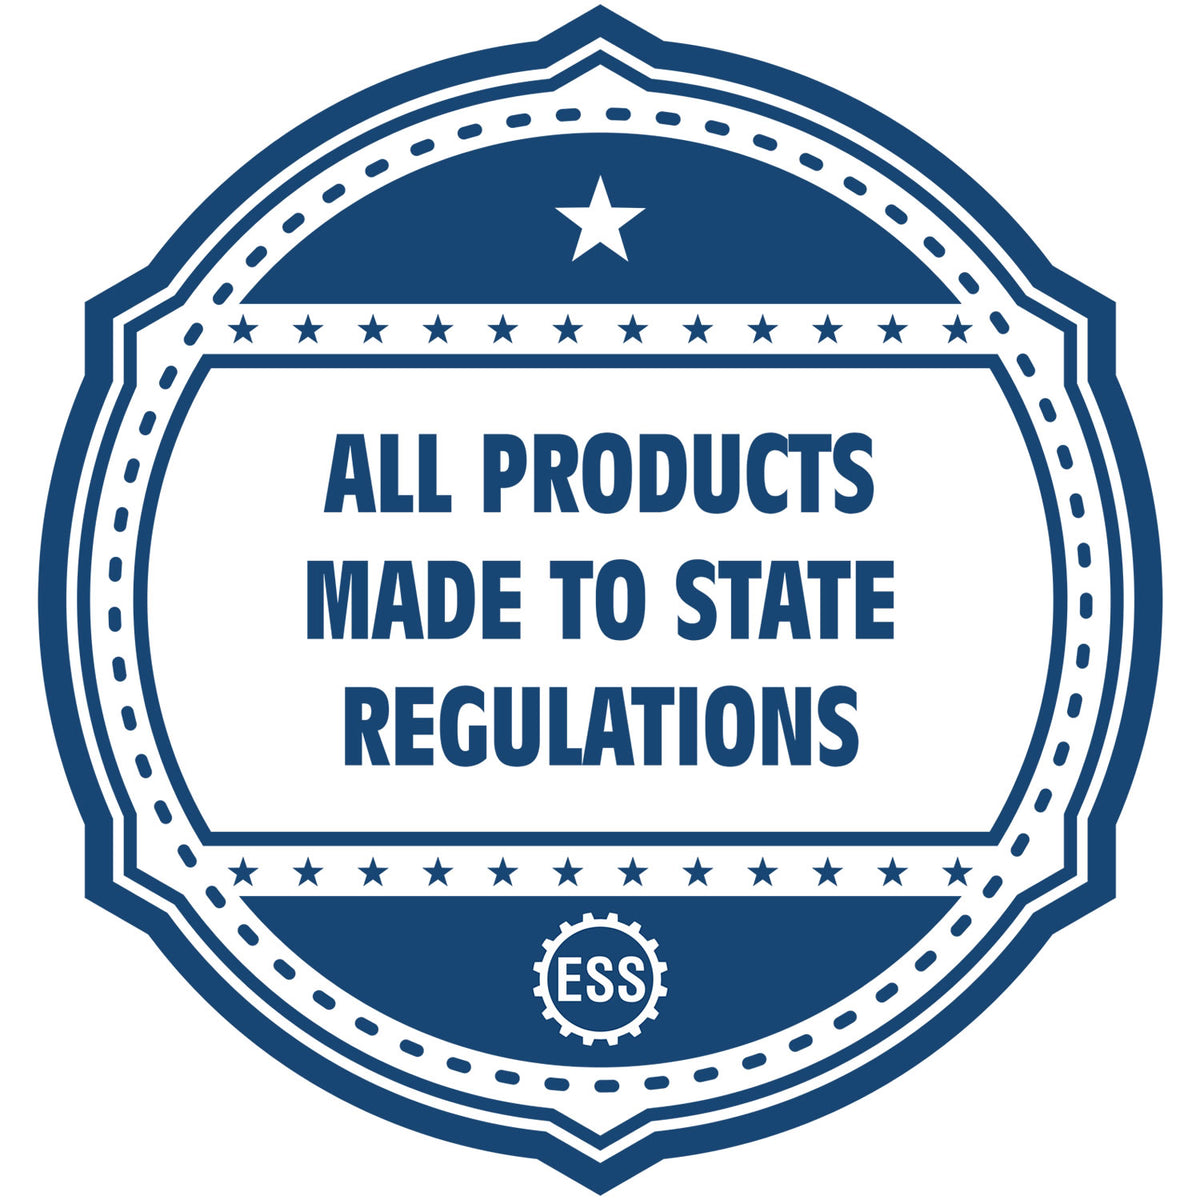 A blue icon or badge for the Slim Pre-Inked South Dakota Professional Geologist Seal Stamp showing that this product is made in compliance with state regulations.